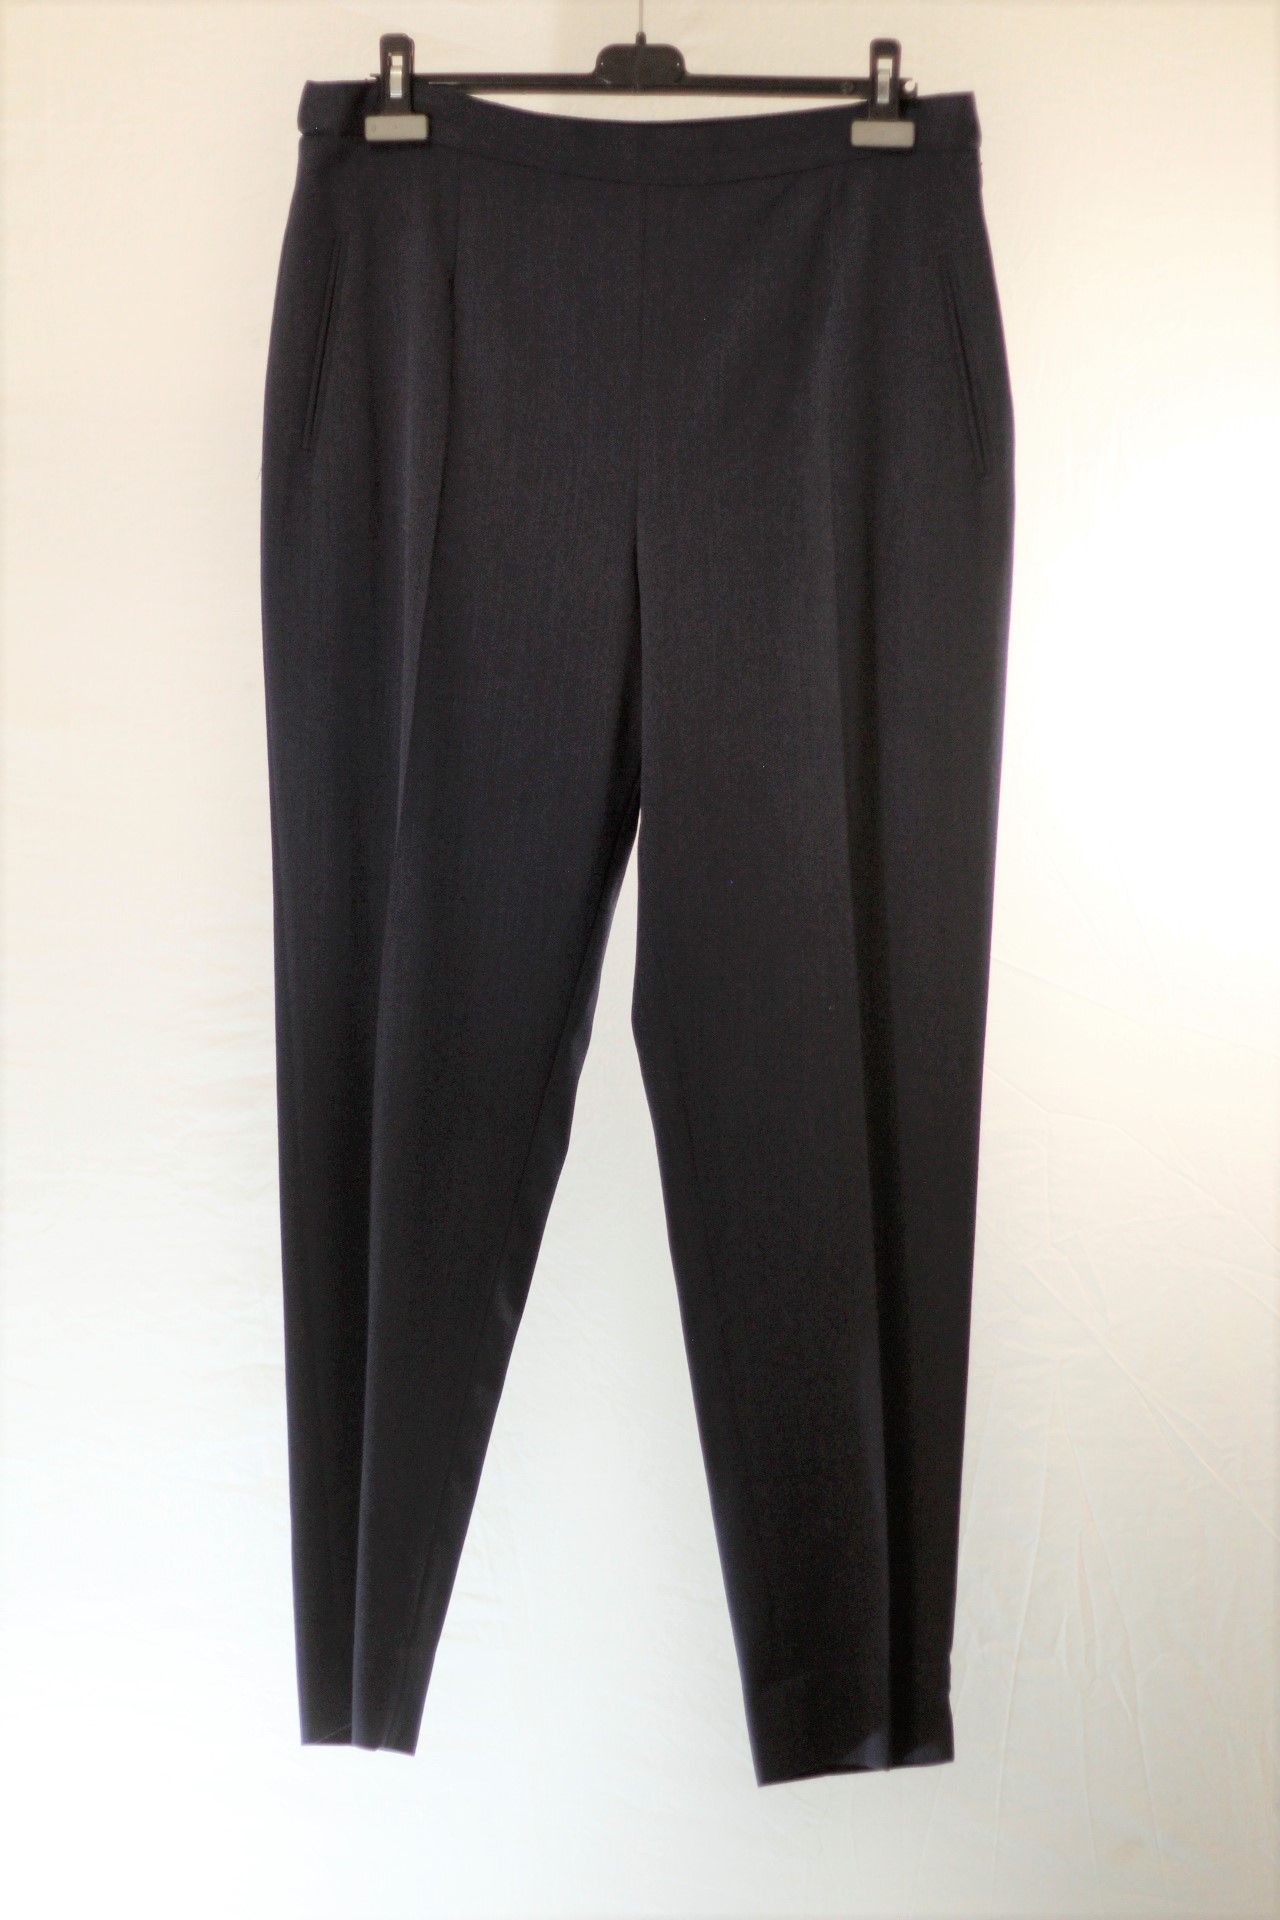 1 x Belvest Navy Trousers - Size: 26 - Material: Wool/ Cotton - From a High End Clothing Boutique In